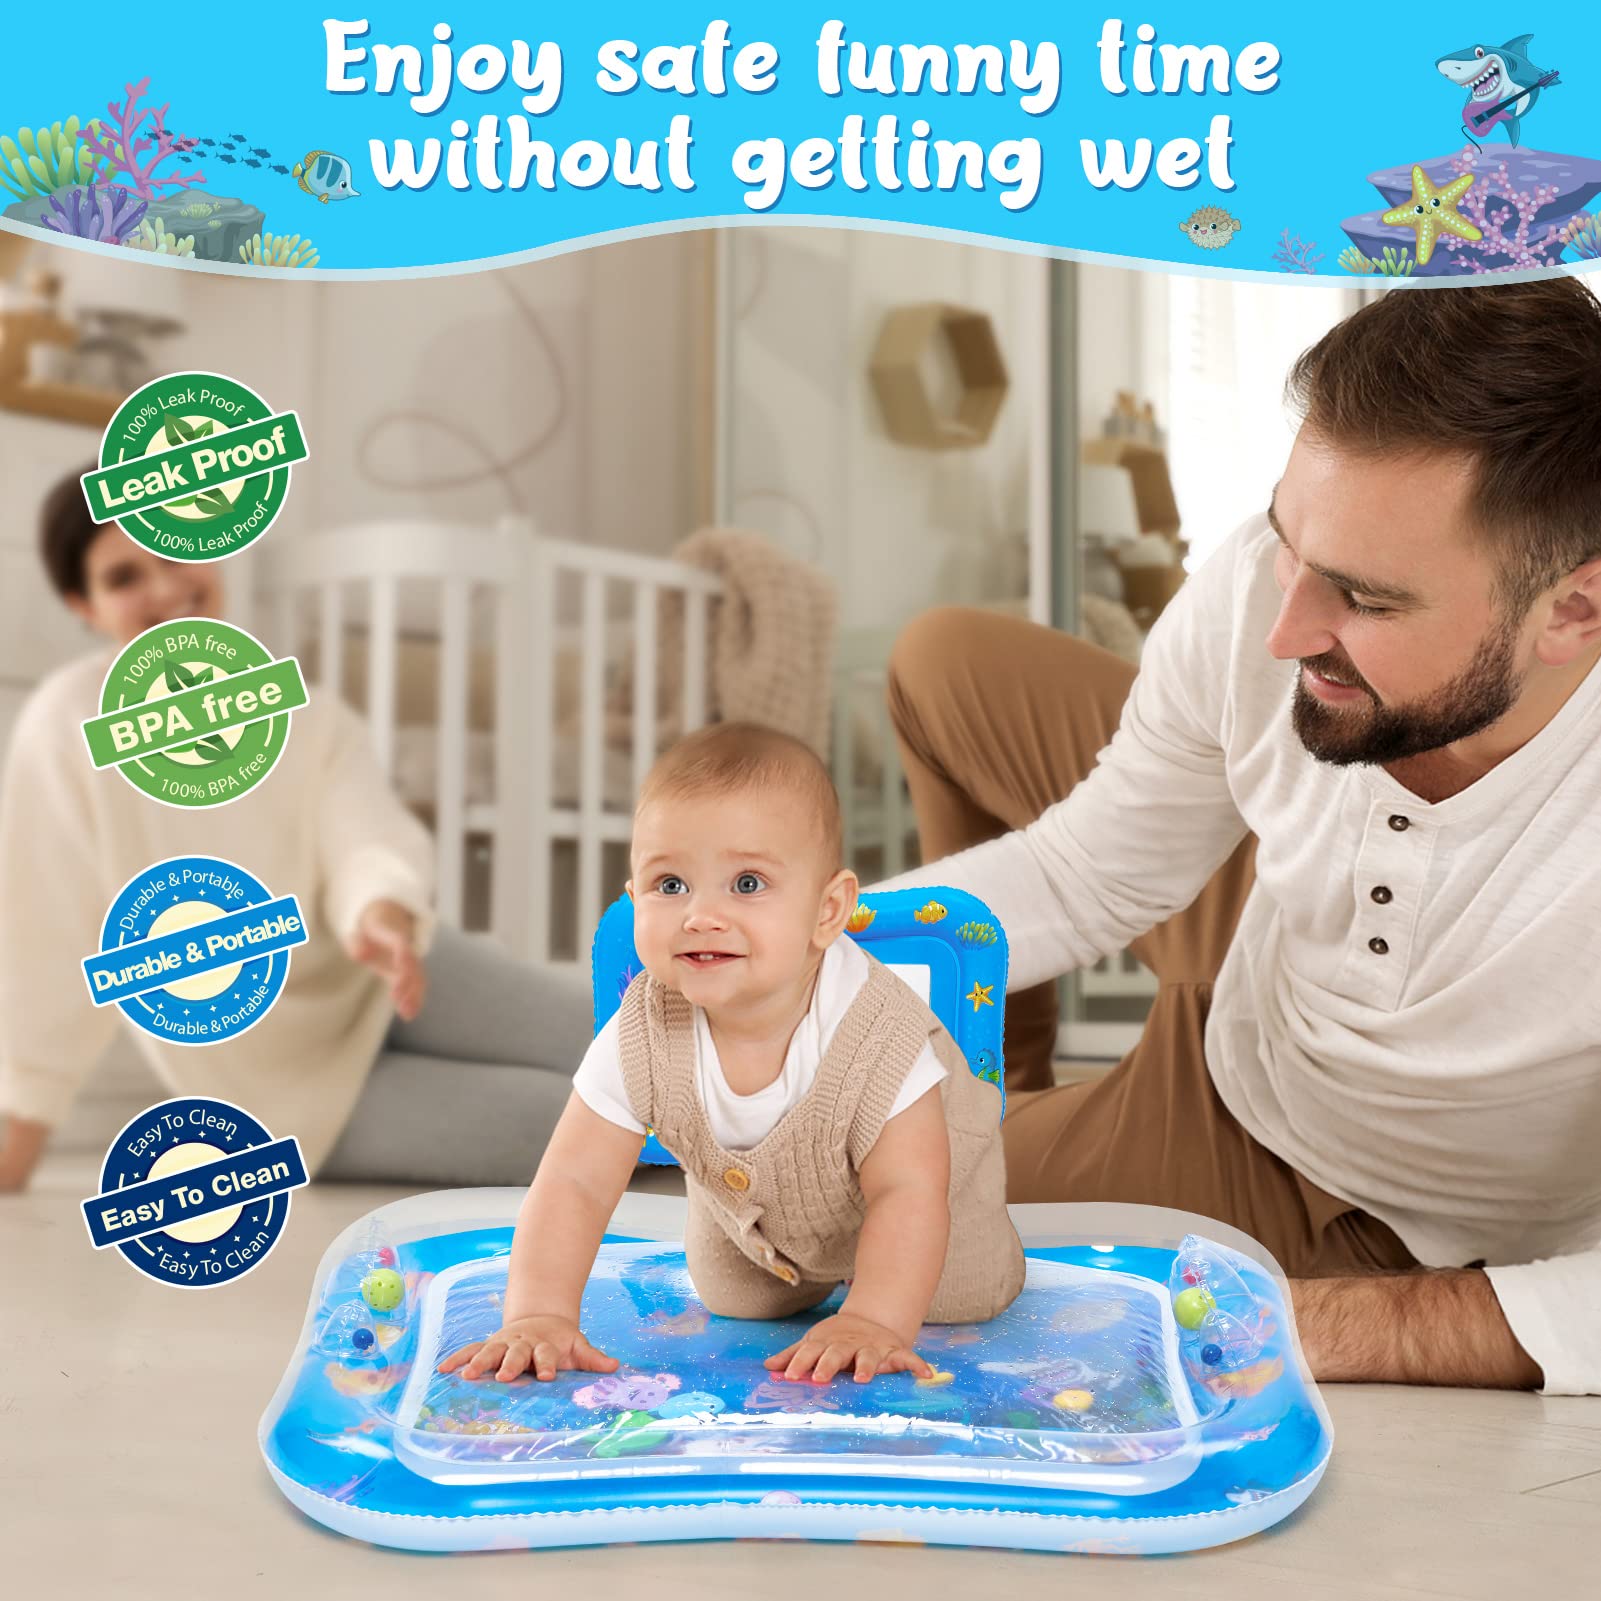 RONIPIC Tummy Time Water Mat with Mirror and Rattles,XL Inflatable Water Mat for Babies Infants Toddlers, The Perfect Fun Time Play Activity Center Teething Toys for 3 6 9 12 Month Baby Boy Girl